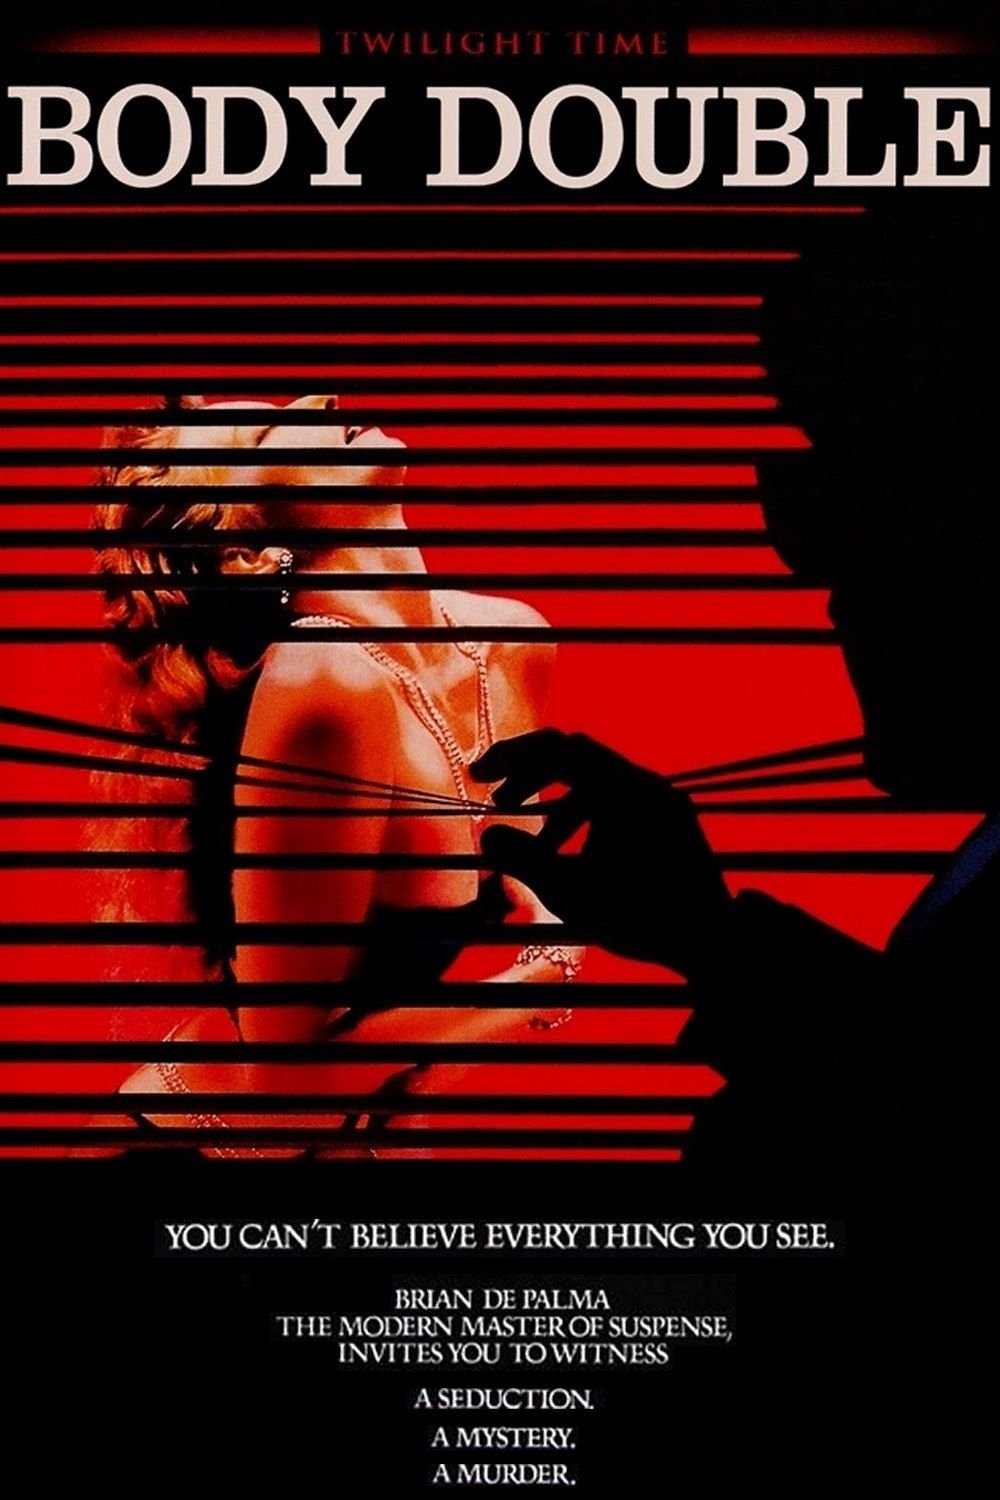 https://www.cinemaclock.com/images/posters/1000x1500/30/body-double-1984-us-poster.jpg